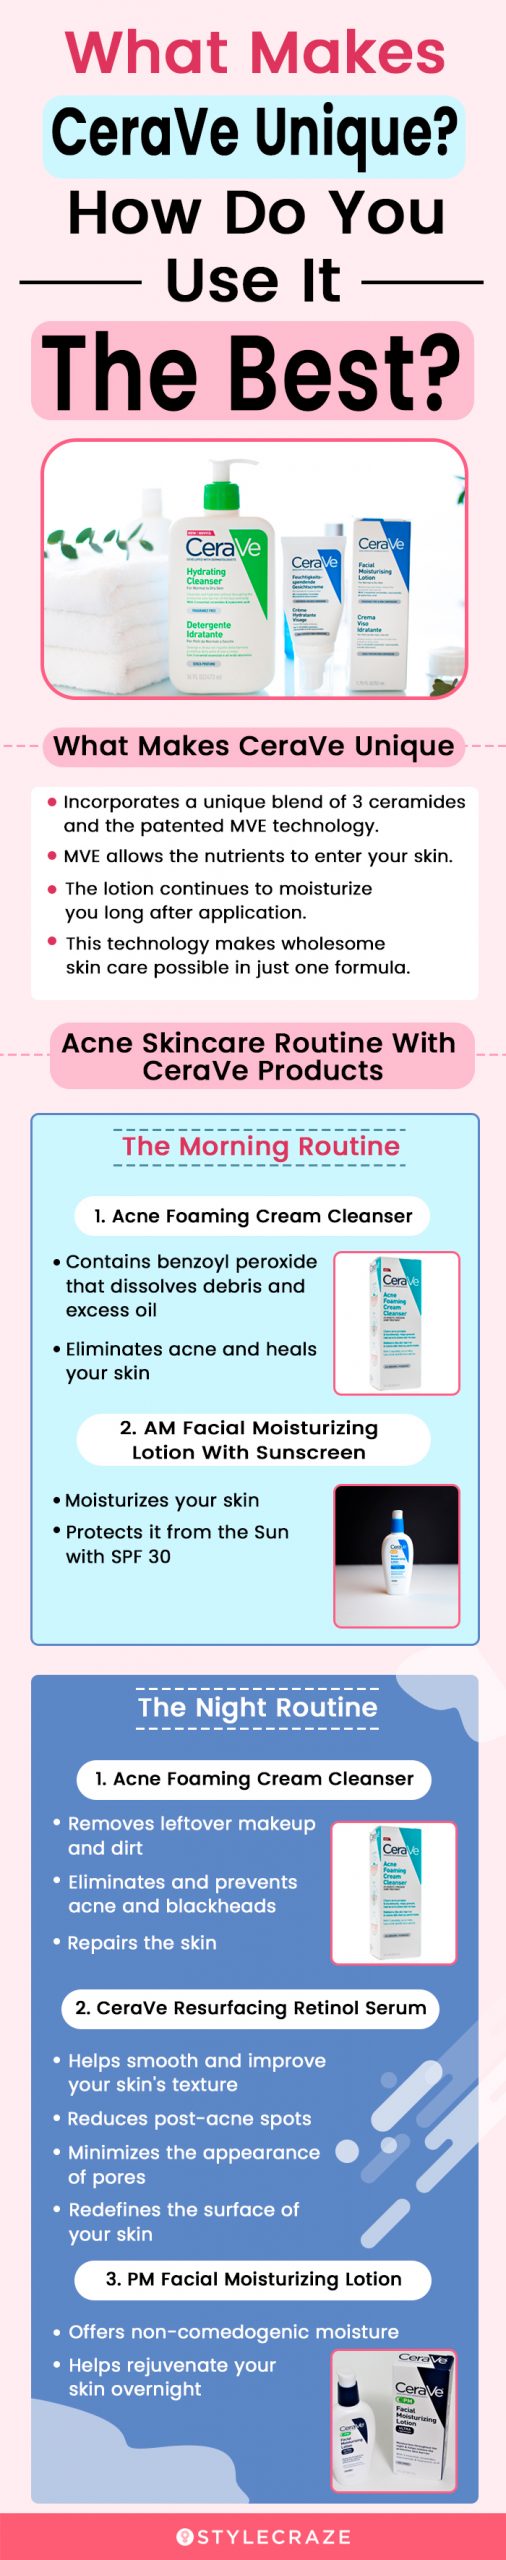 What Makes CeraVe Unique and How to Use It (infographic)